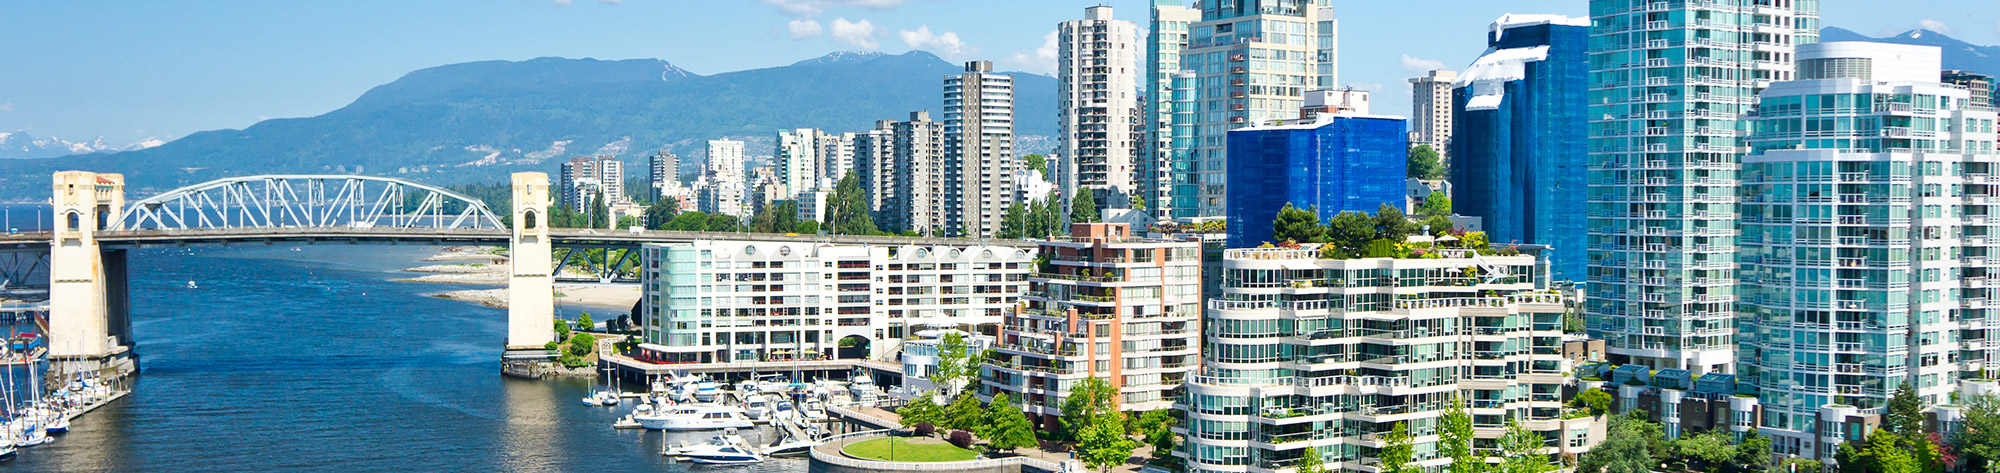 Skyline of Vancouver, British Columbia where Bekatec provides online solutions